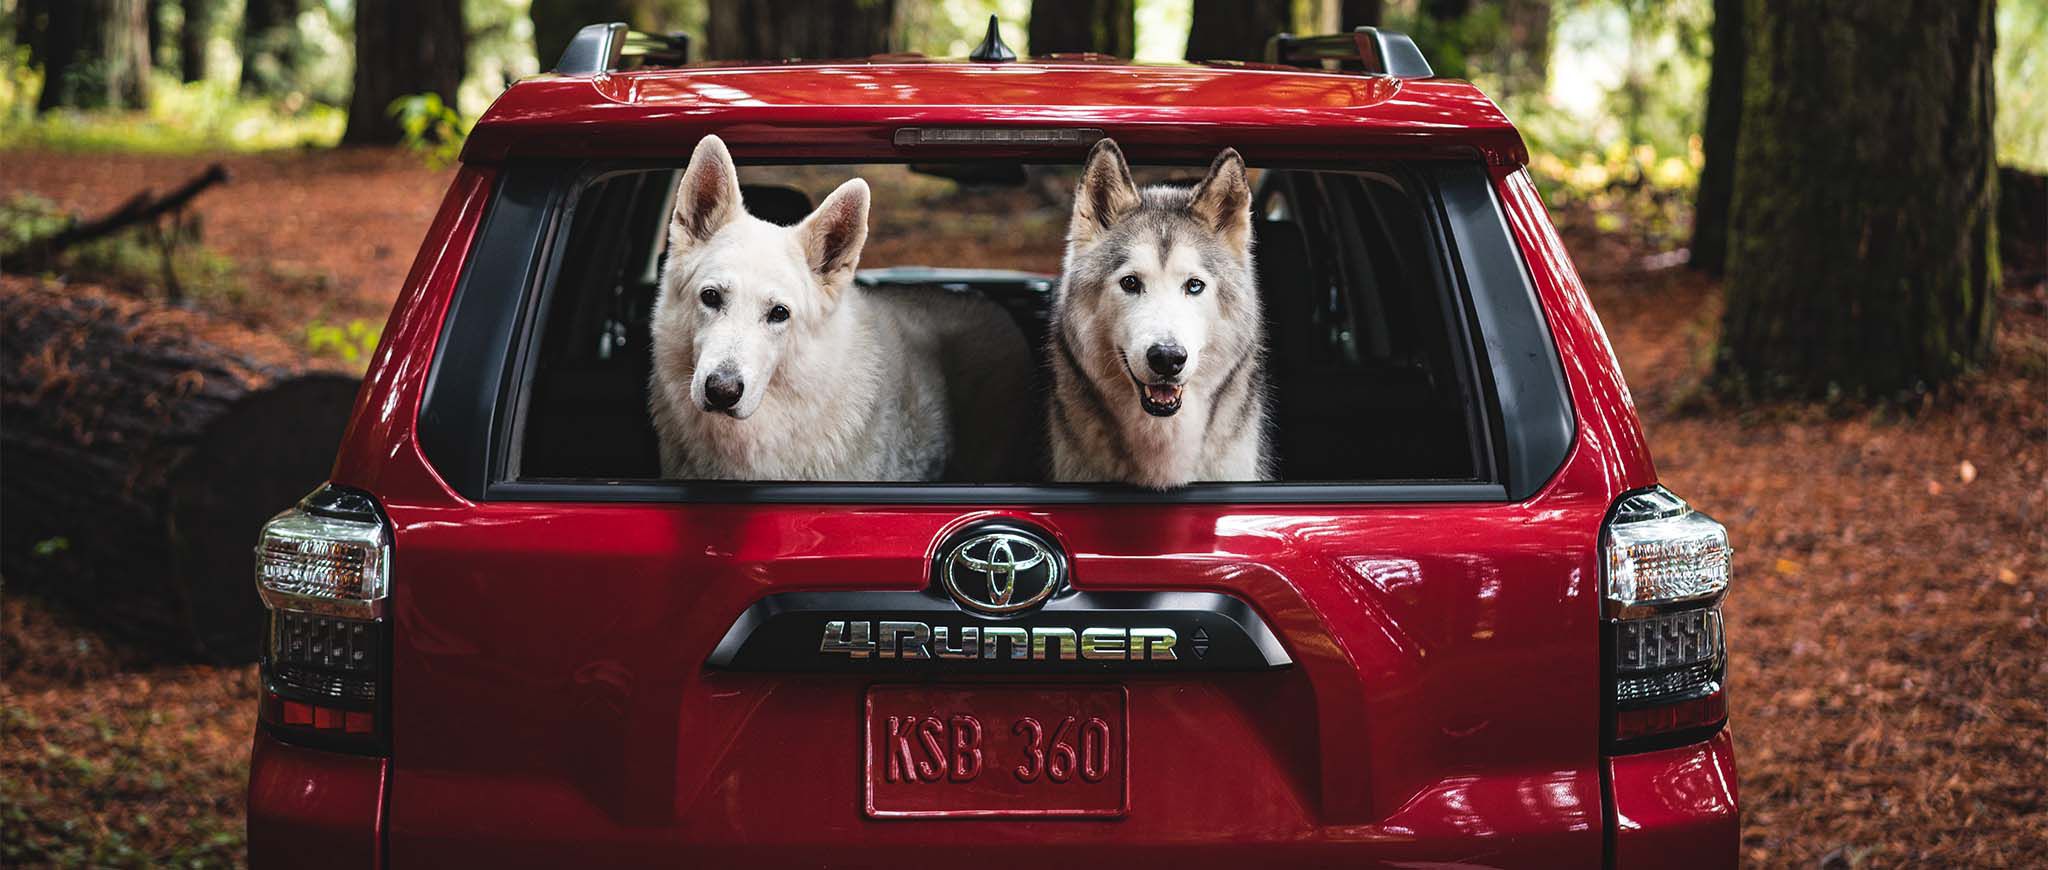 Two dogs peeking out the back of a 4Runner.